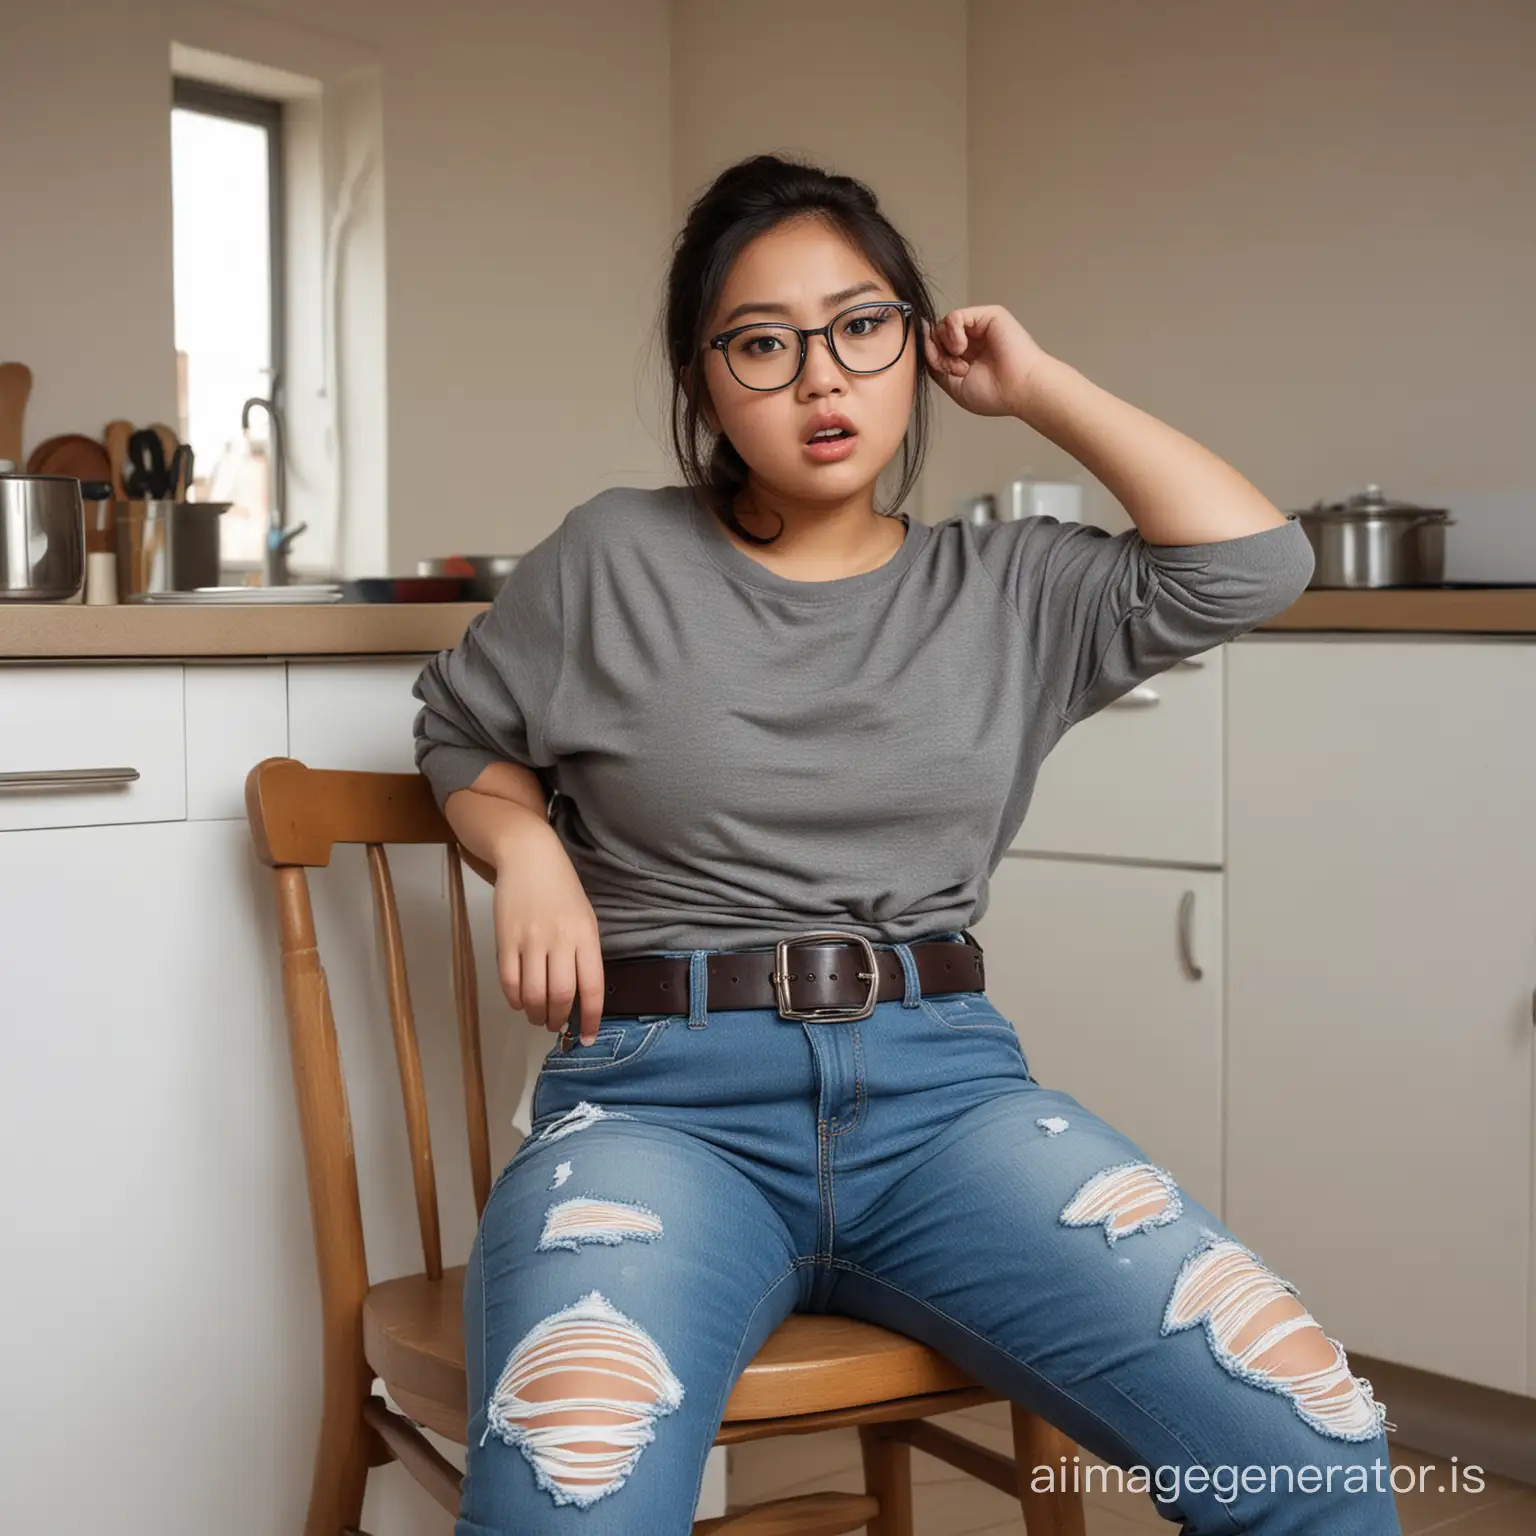 Angry-Asian-Teenage-Girl-in-Ripped-Jeans-Sitting-in-Kitchen